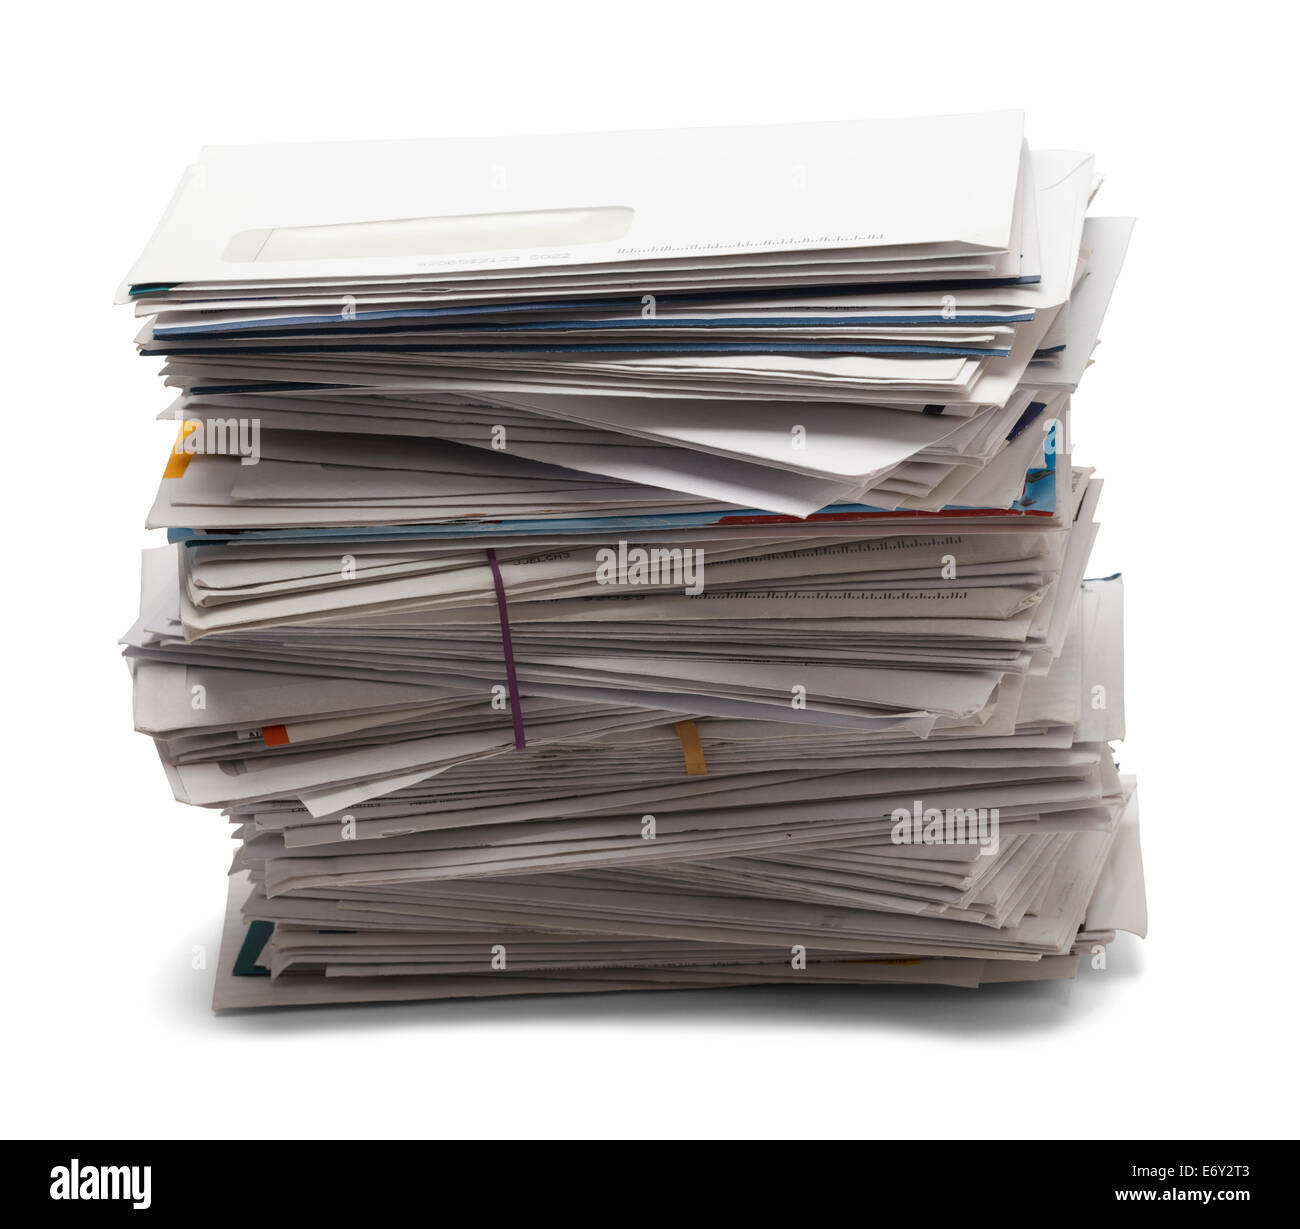 Junk mail stacked high of unpaid bills from the side view, isolated on a white background. Stock Photo